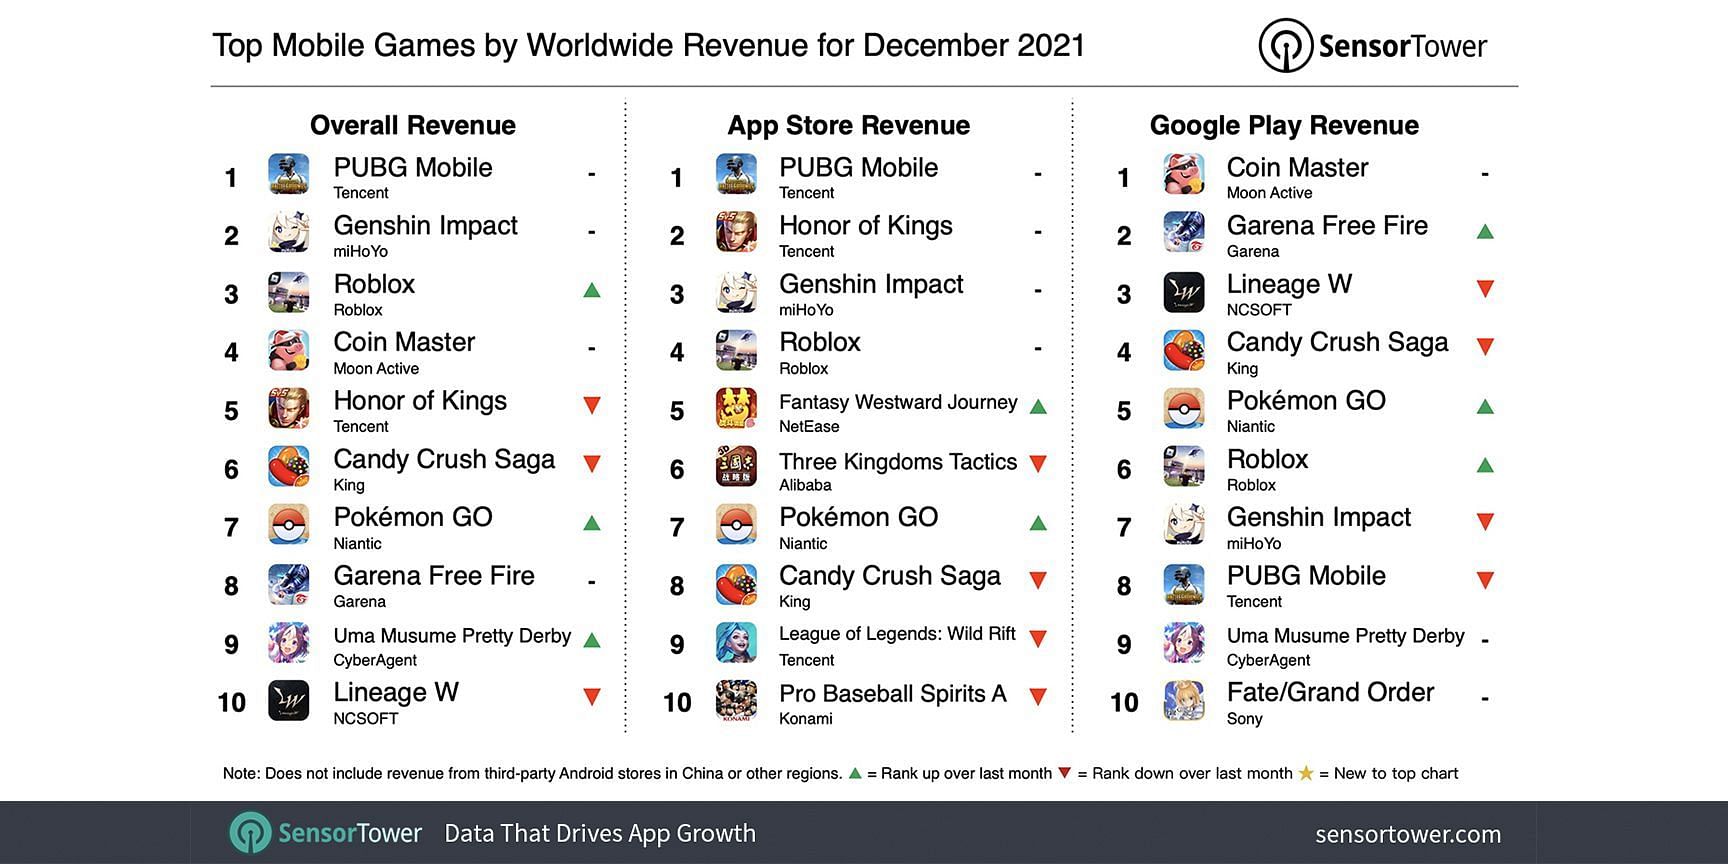 PUBG Mobile emerged as the highest-grossing mobile title in December 2021 (Image via Sensor Tower)